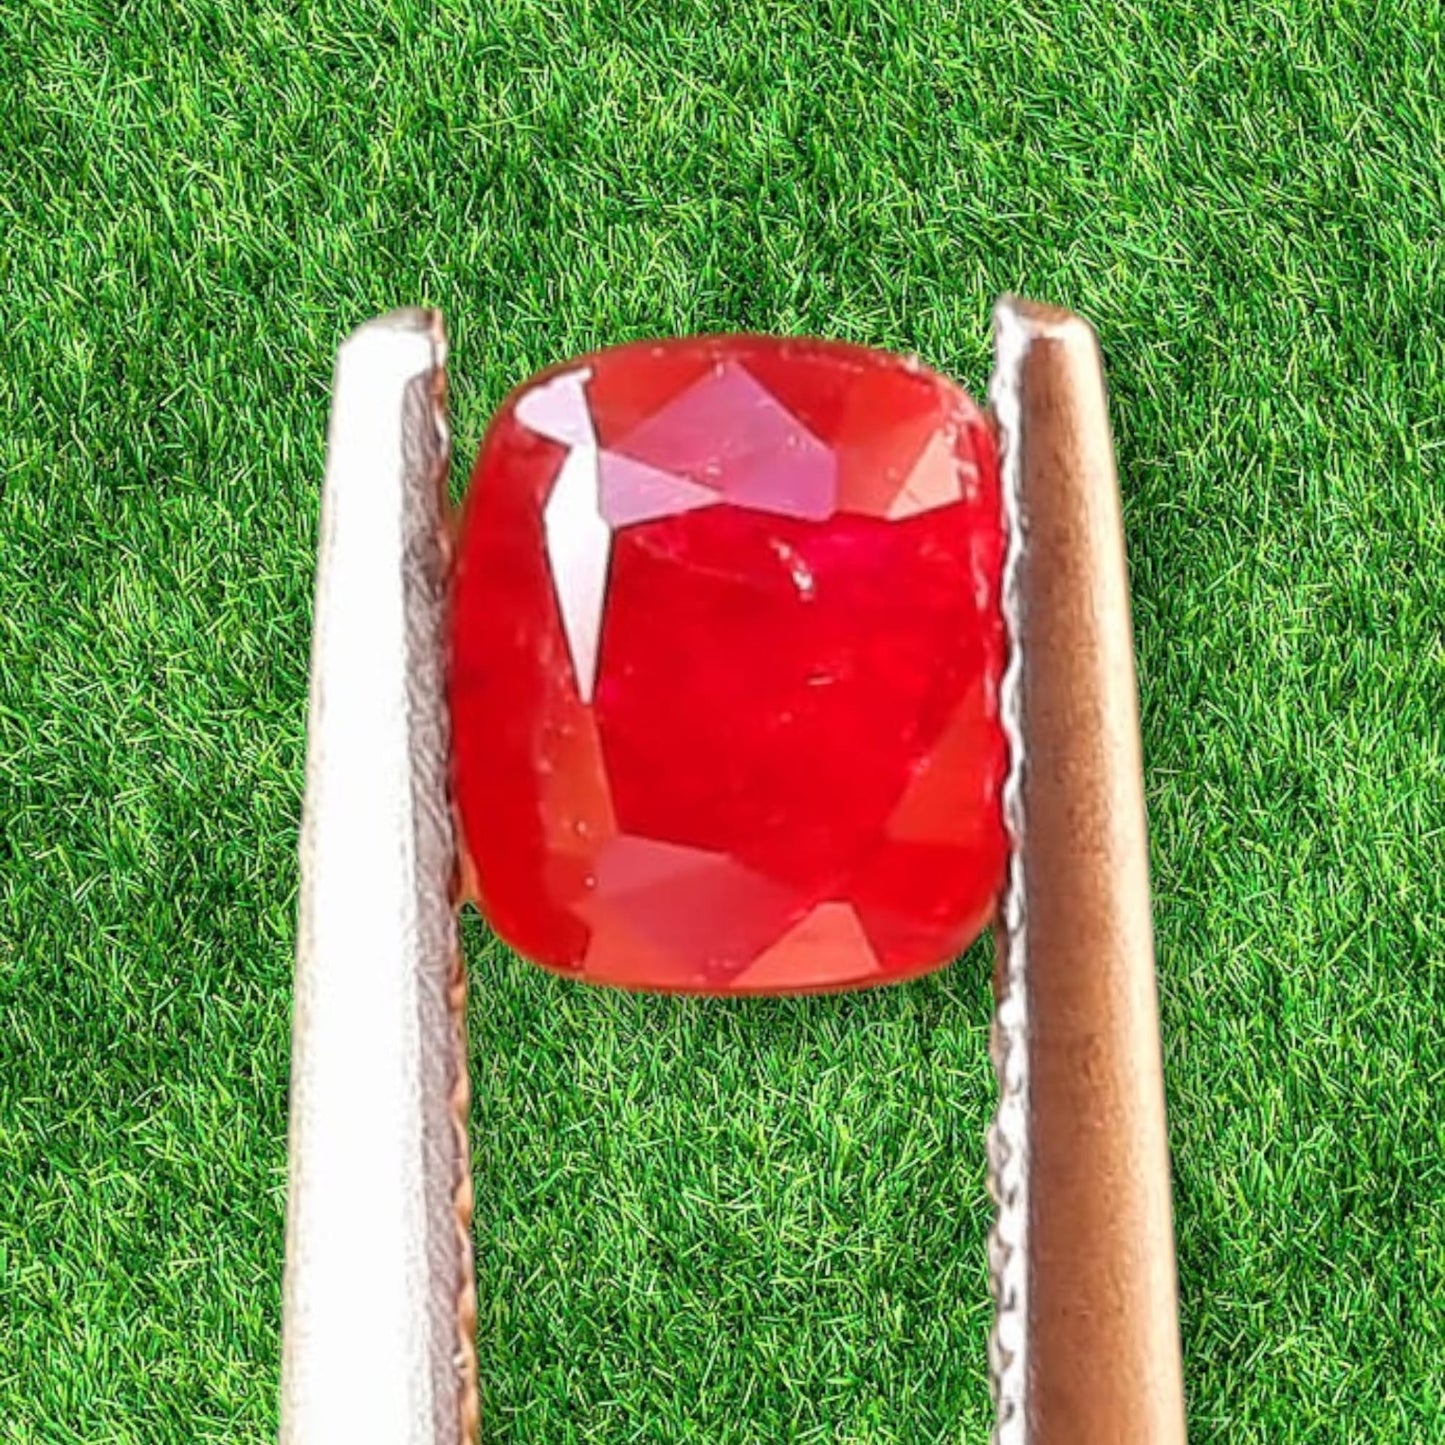 Loose natural unheated 0.77 ct. Kashmir red Ruby with inclusions.